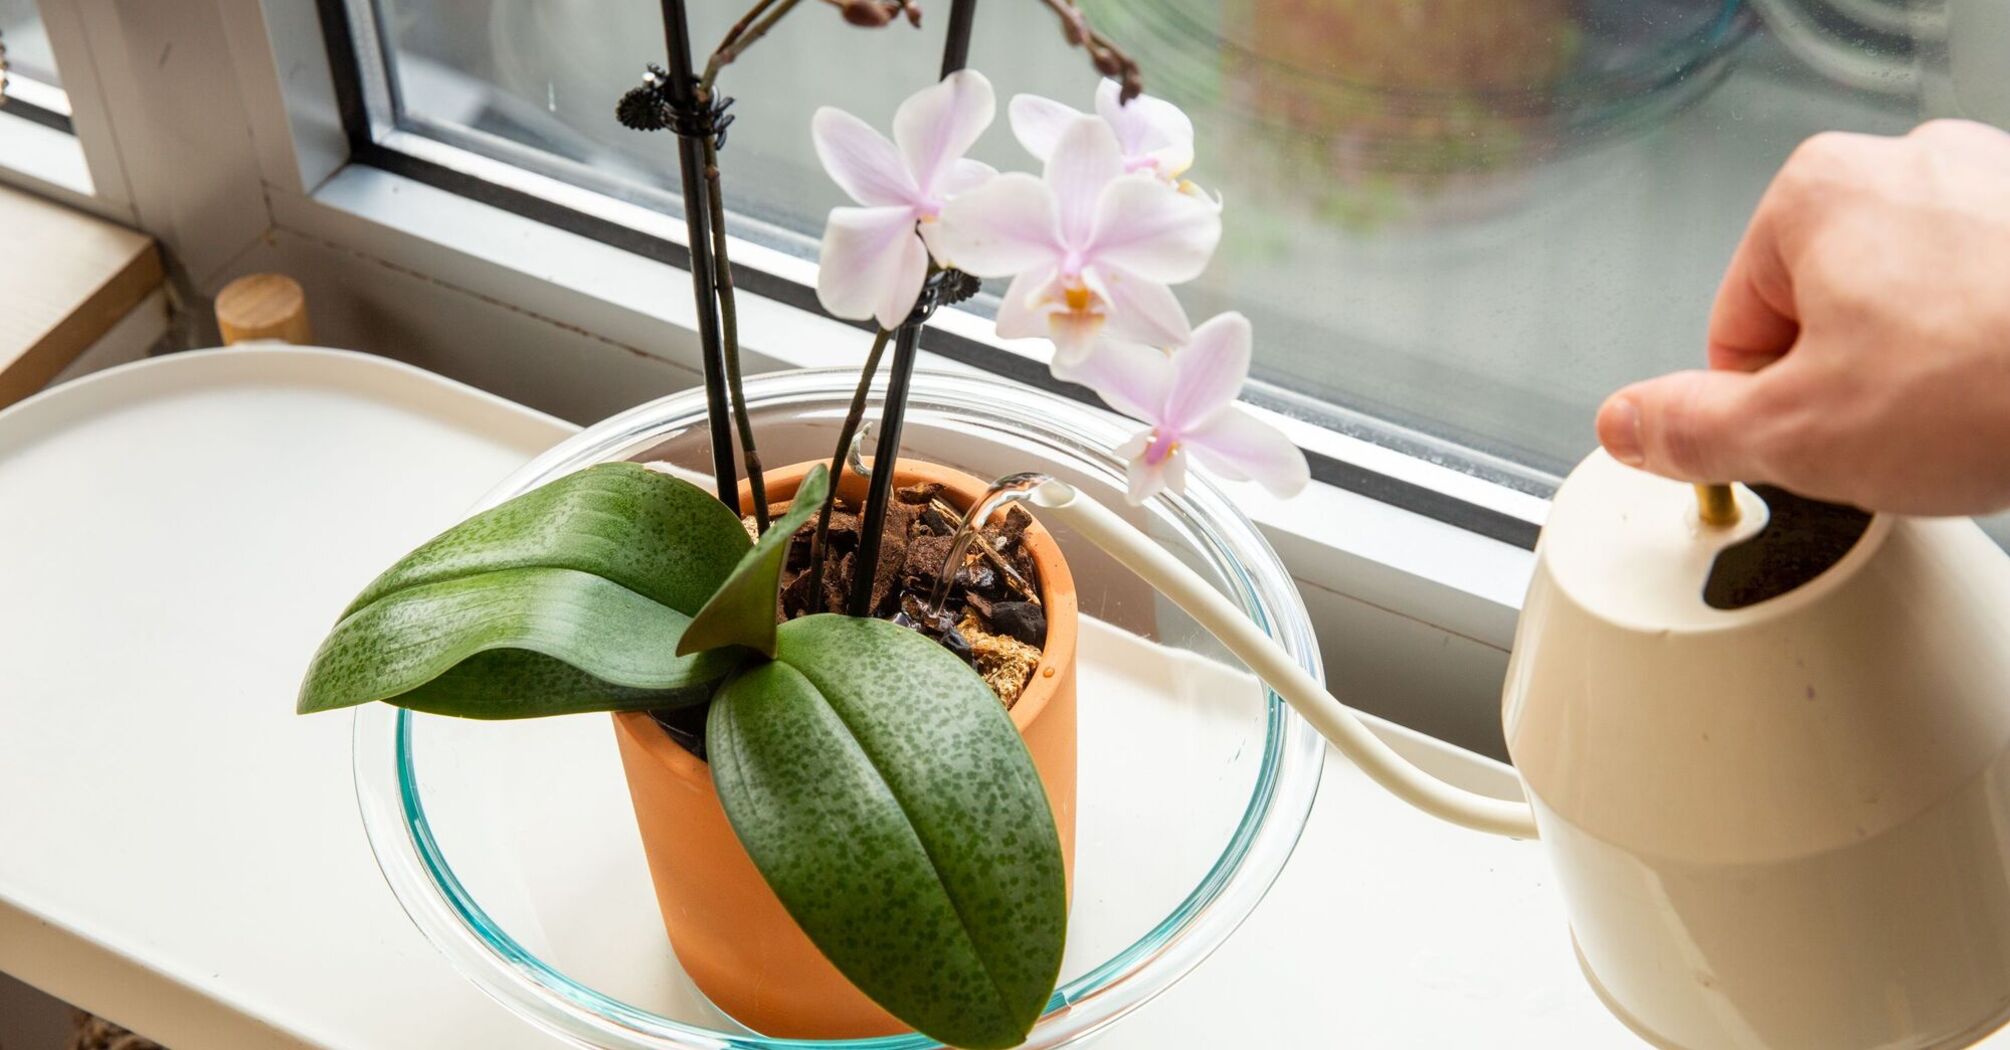 How to tell when to water an orchid